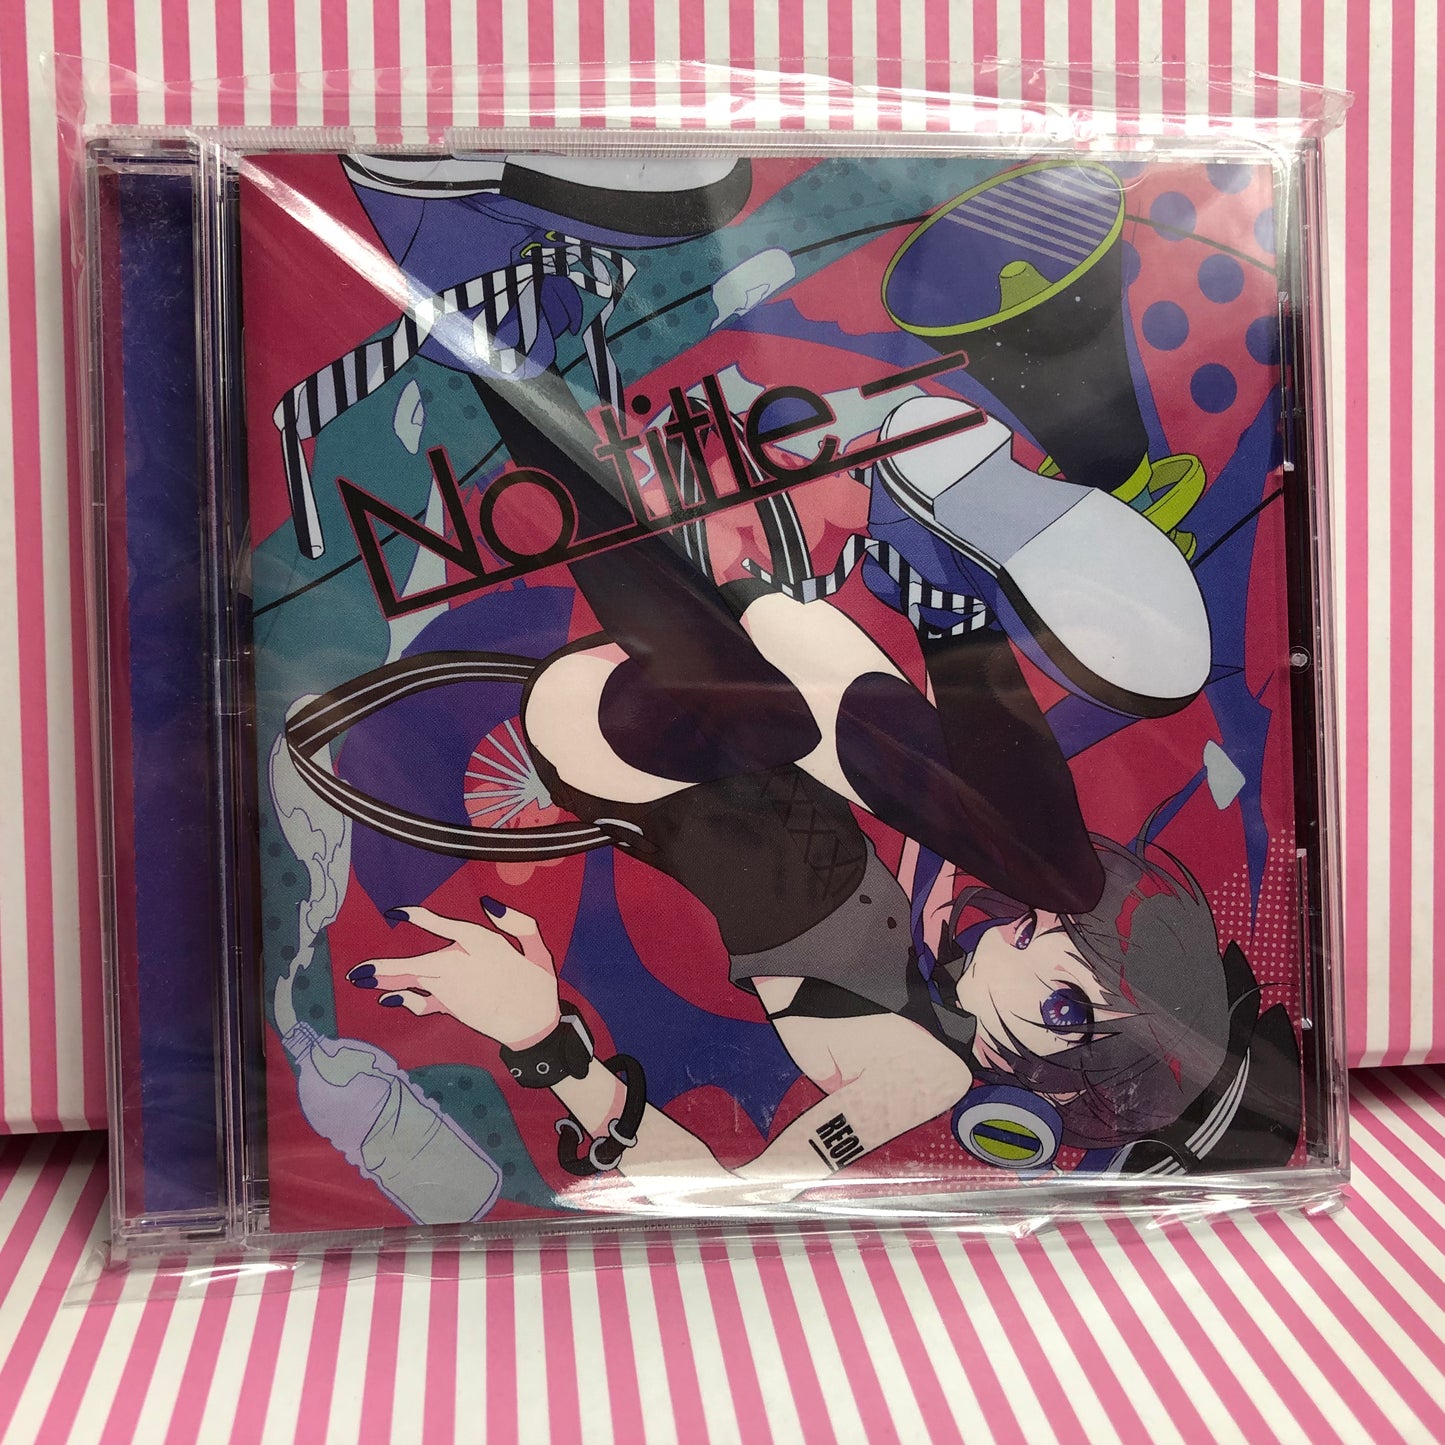 REOL - No Title - Minus CD